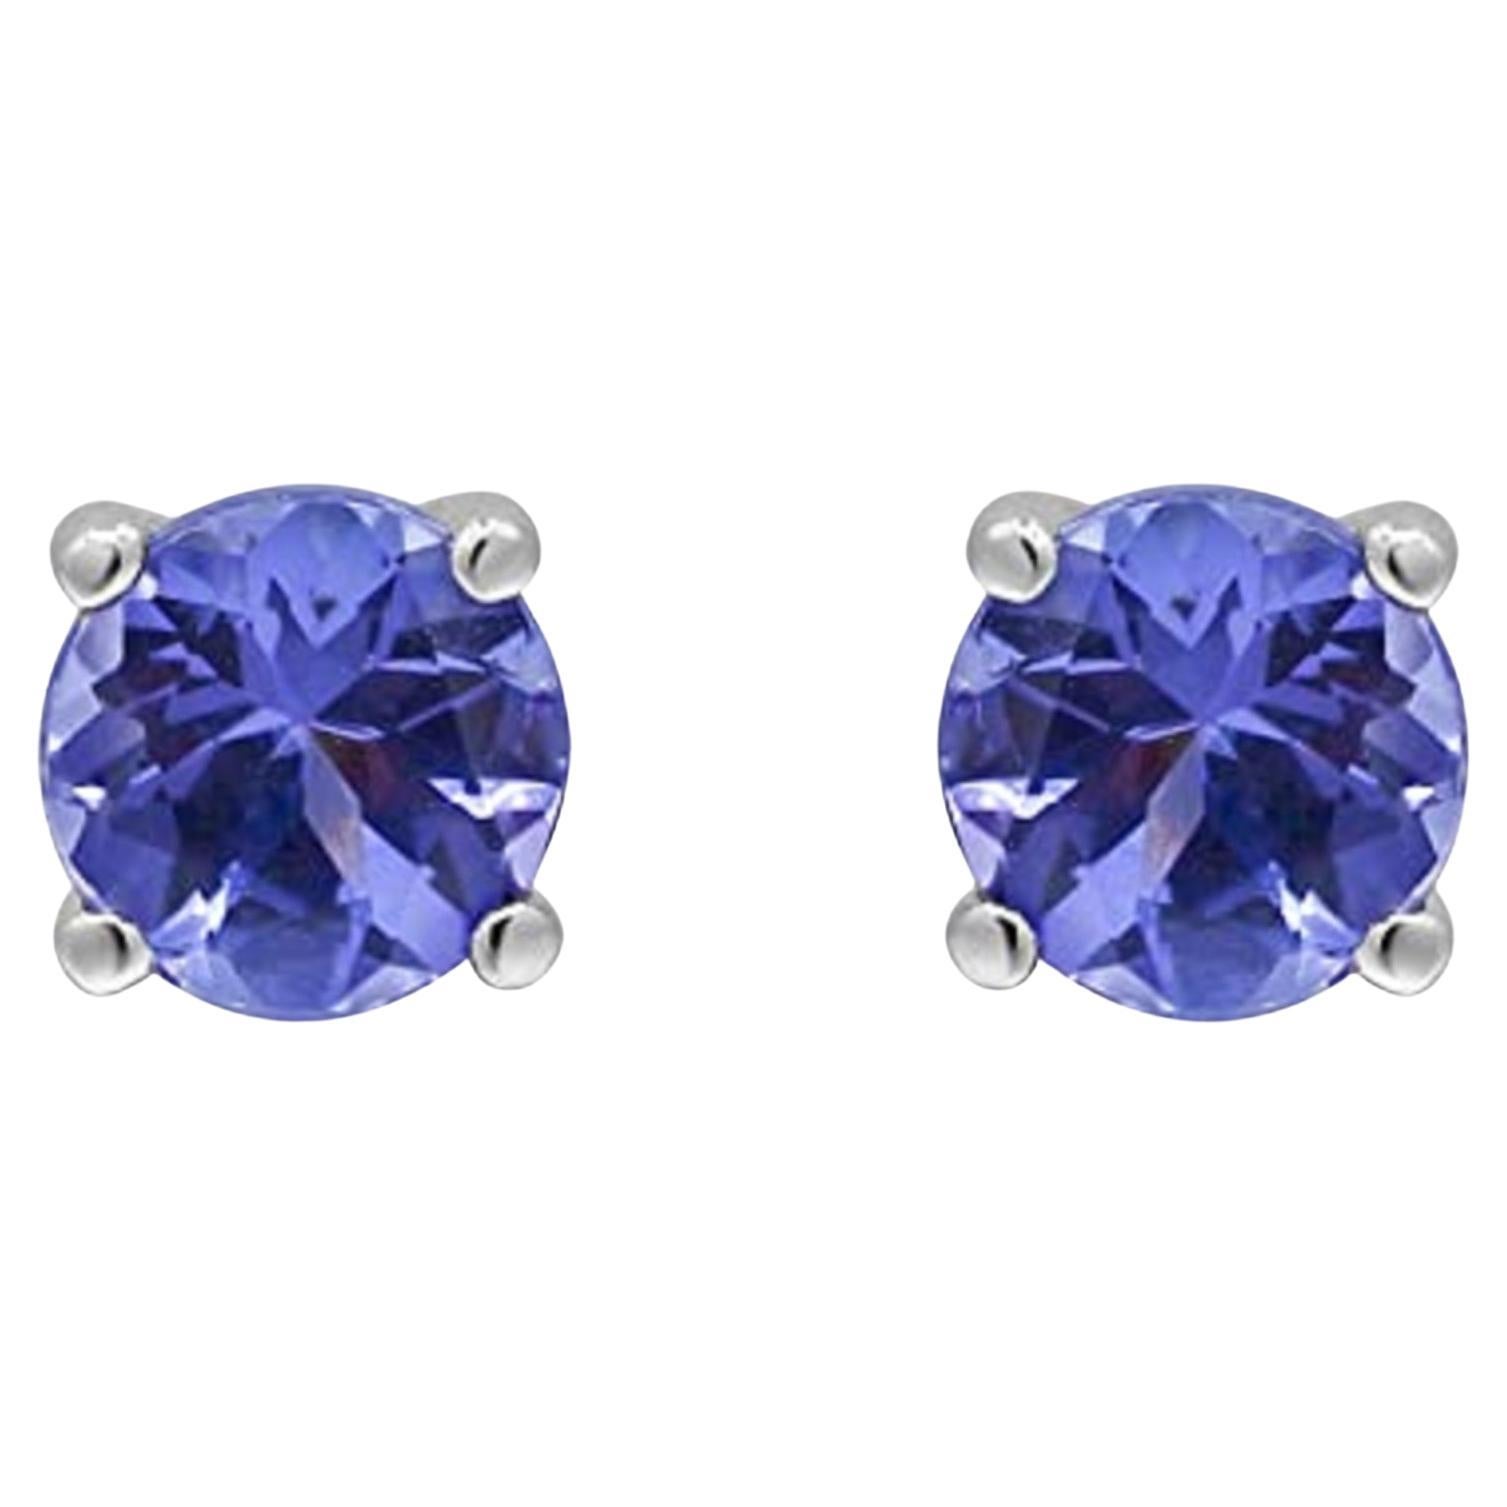 1.02 Carat Round-Cut Tanzanite 925 Sterling Silver Stud Earring For Sale